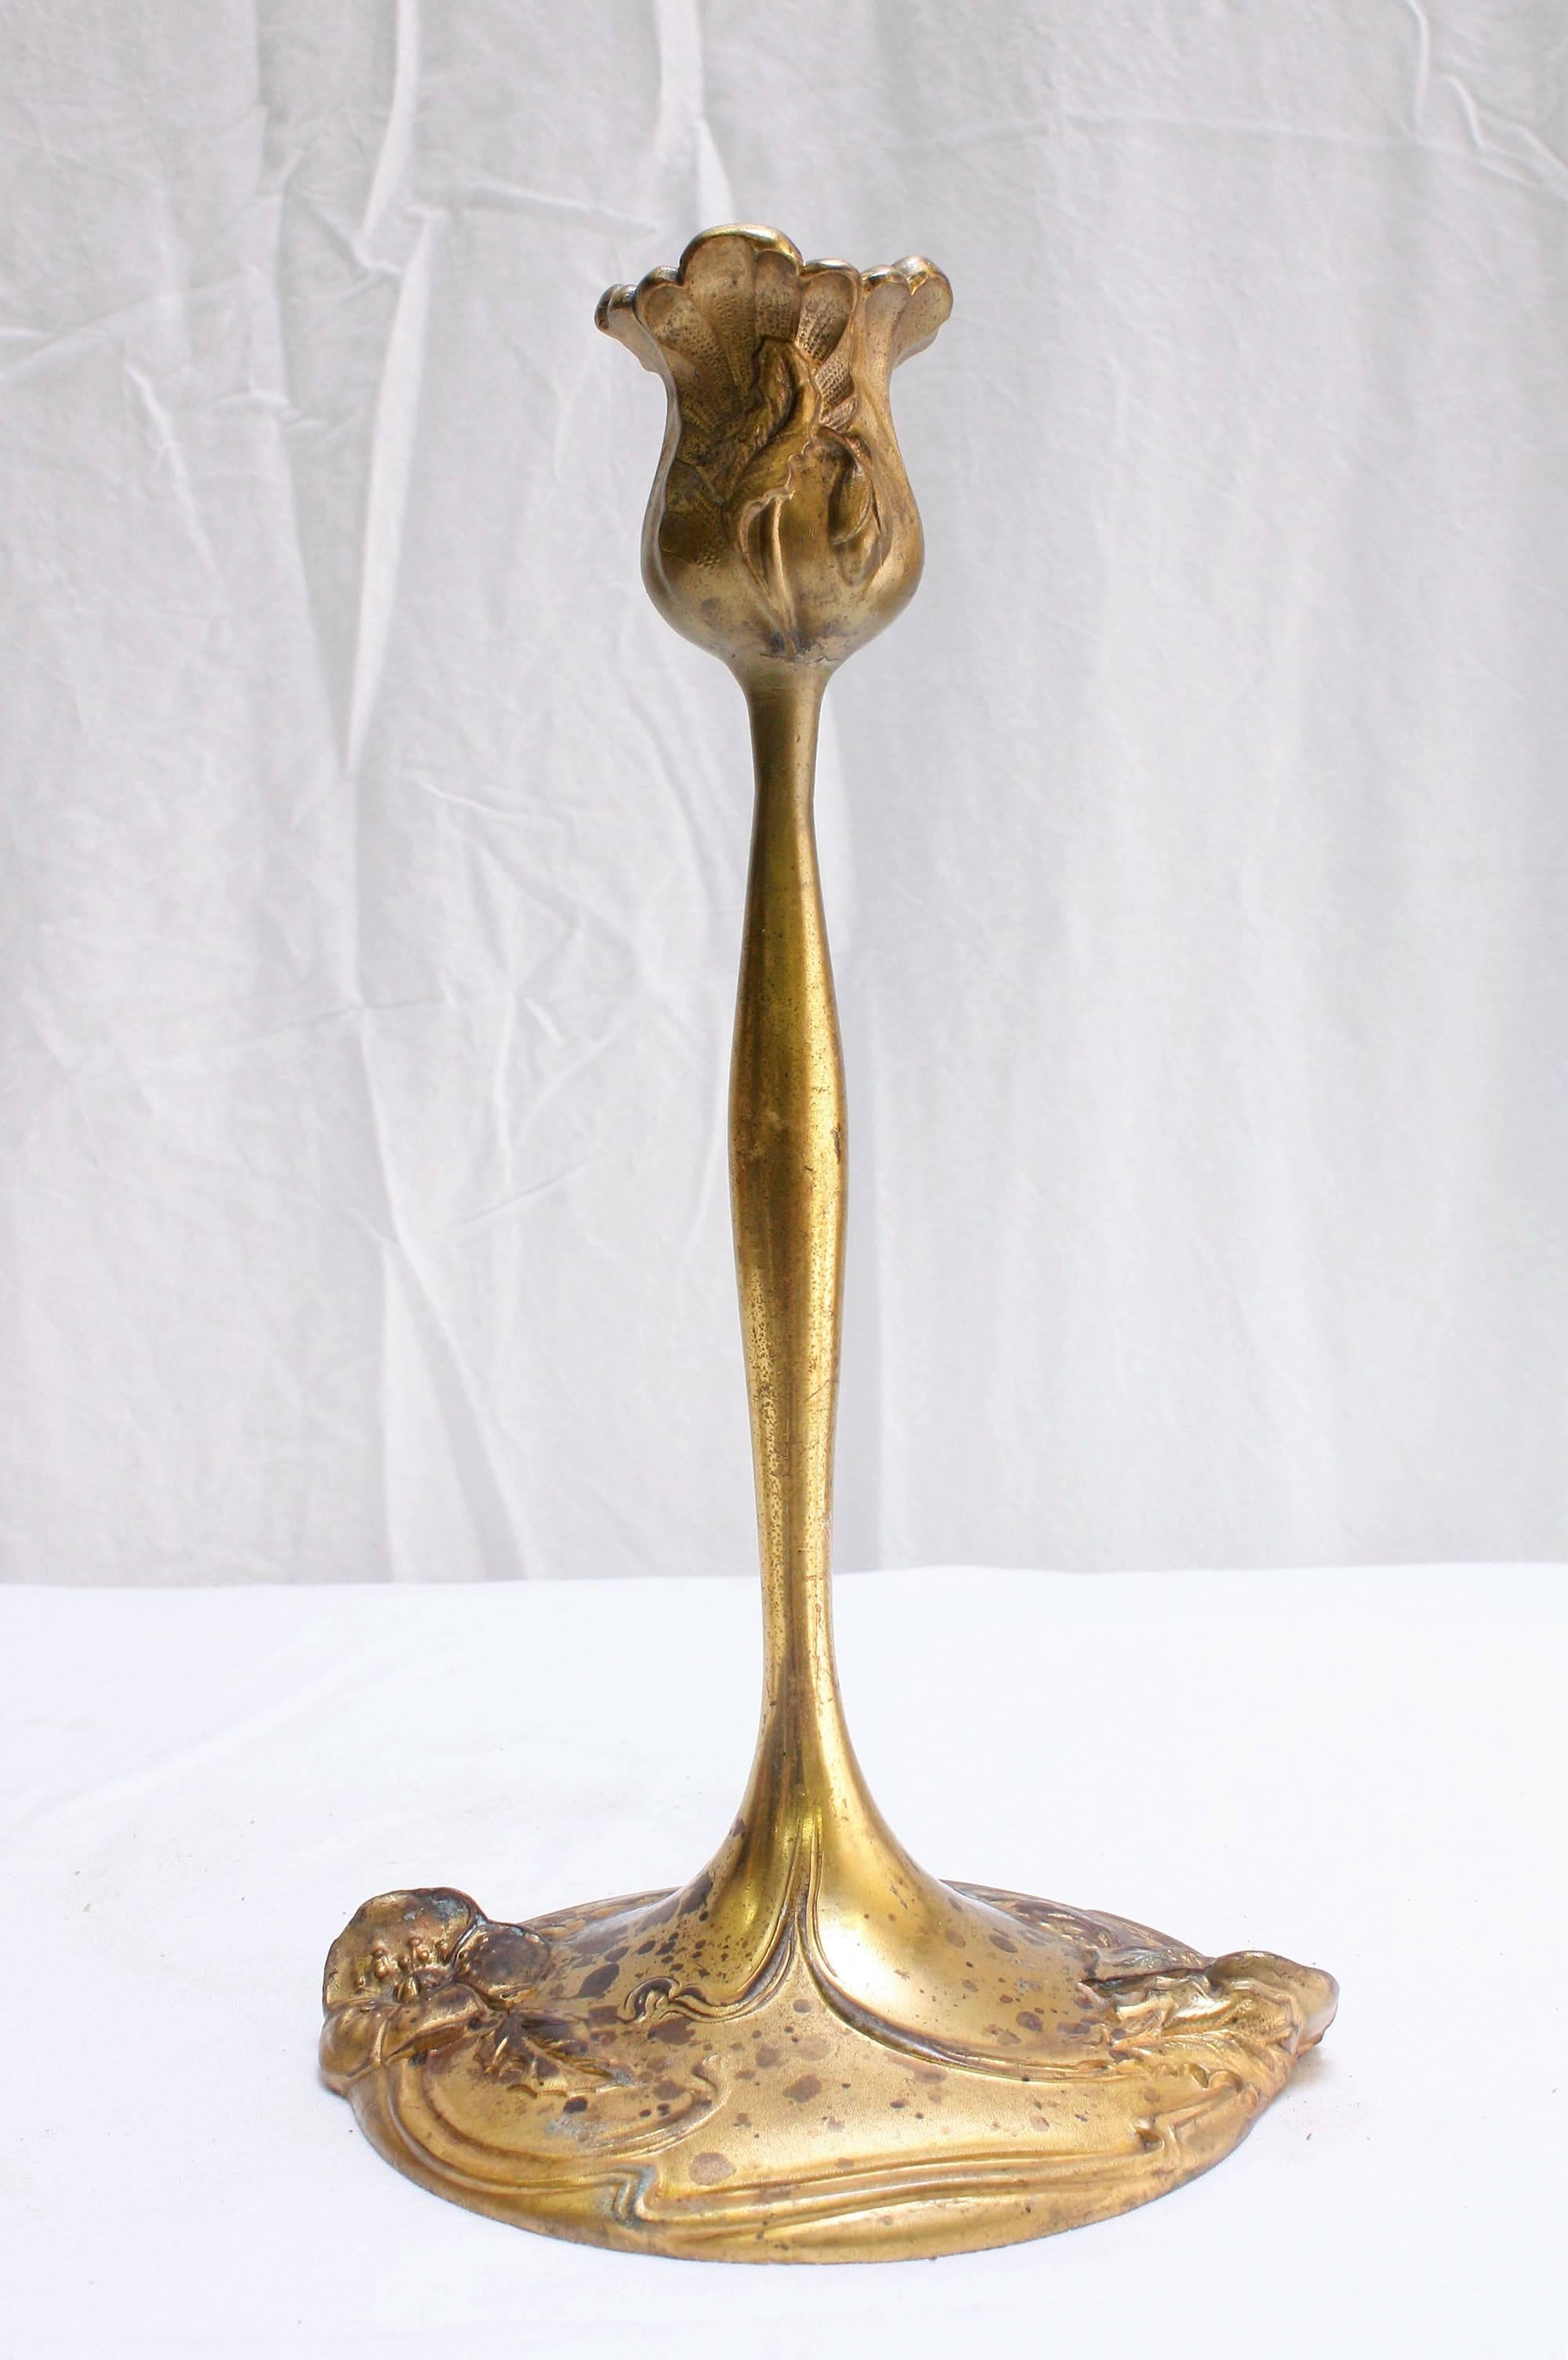 20th Century Pair of French Art Nouveau-Style Candlesticks